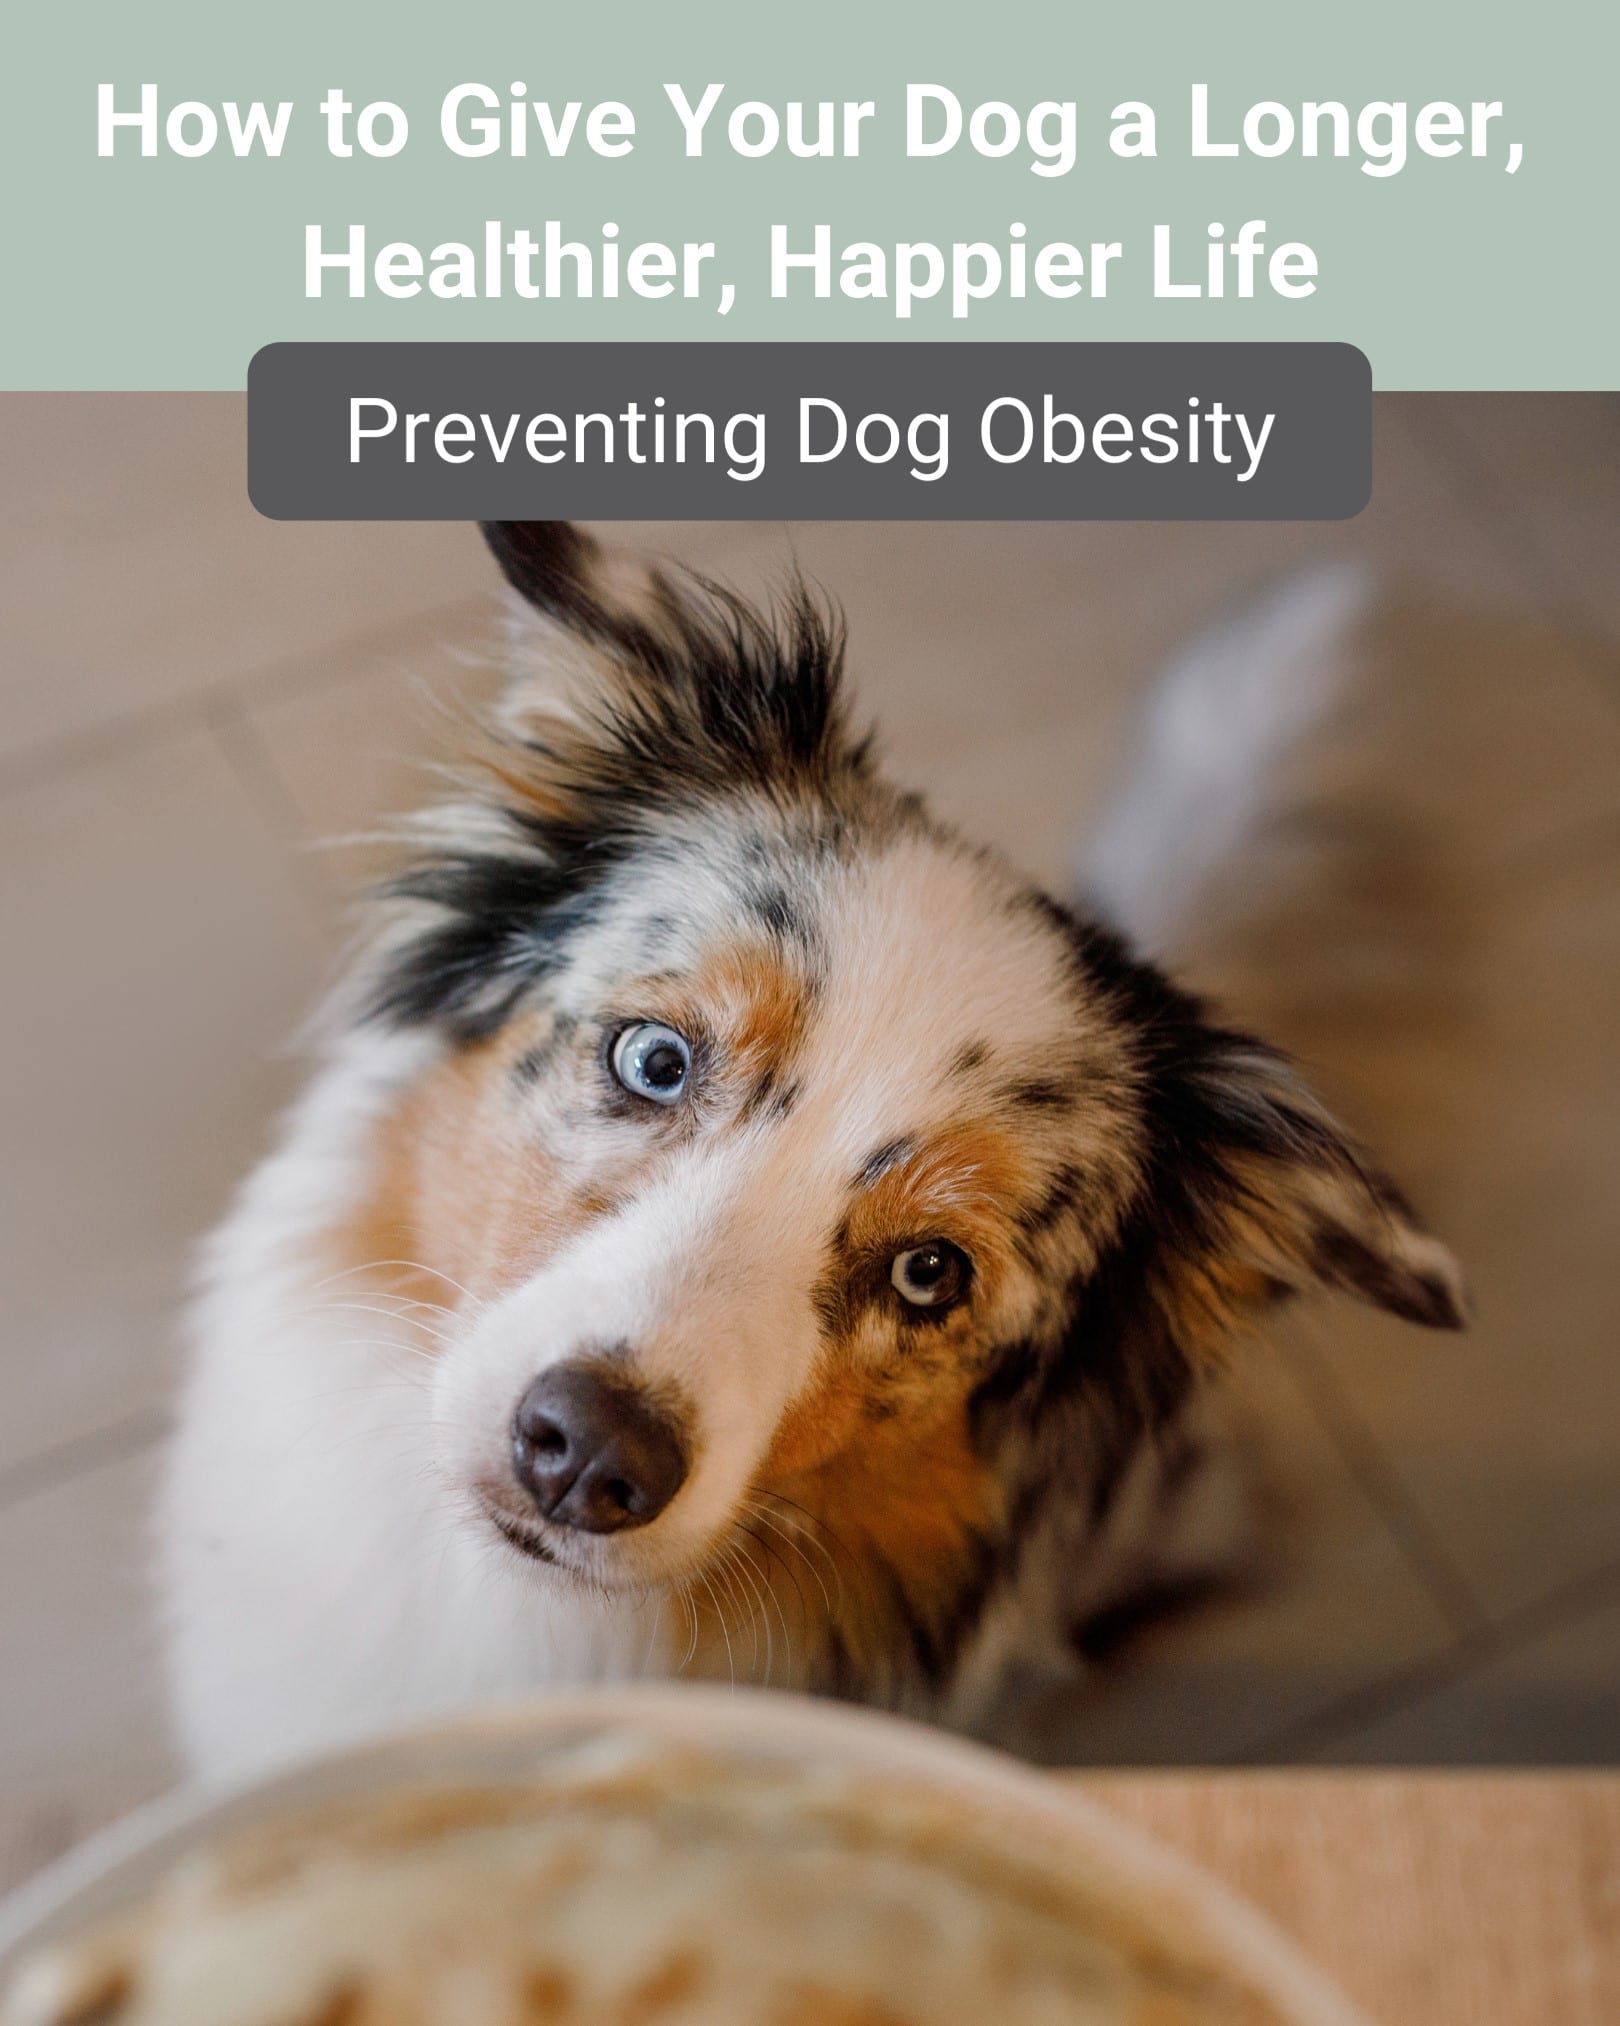 Preventing Dog Obesity: How to Give Your Dog a Longer, Happier Life